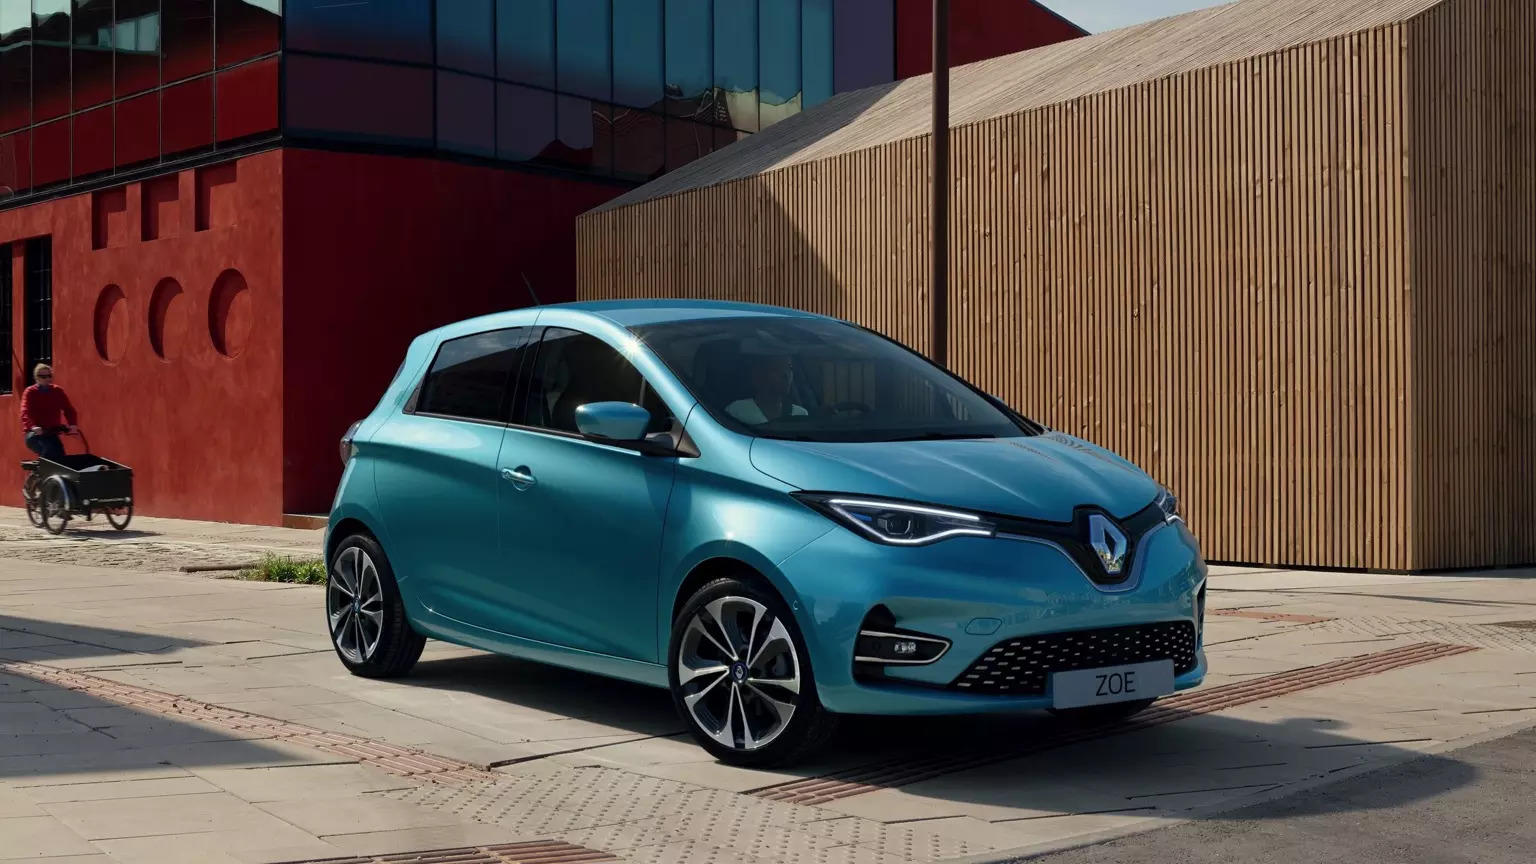 Renault Zoe goes from hero to zero in European safety agency rating, ET Auto